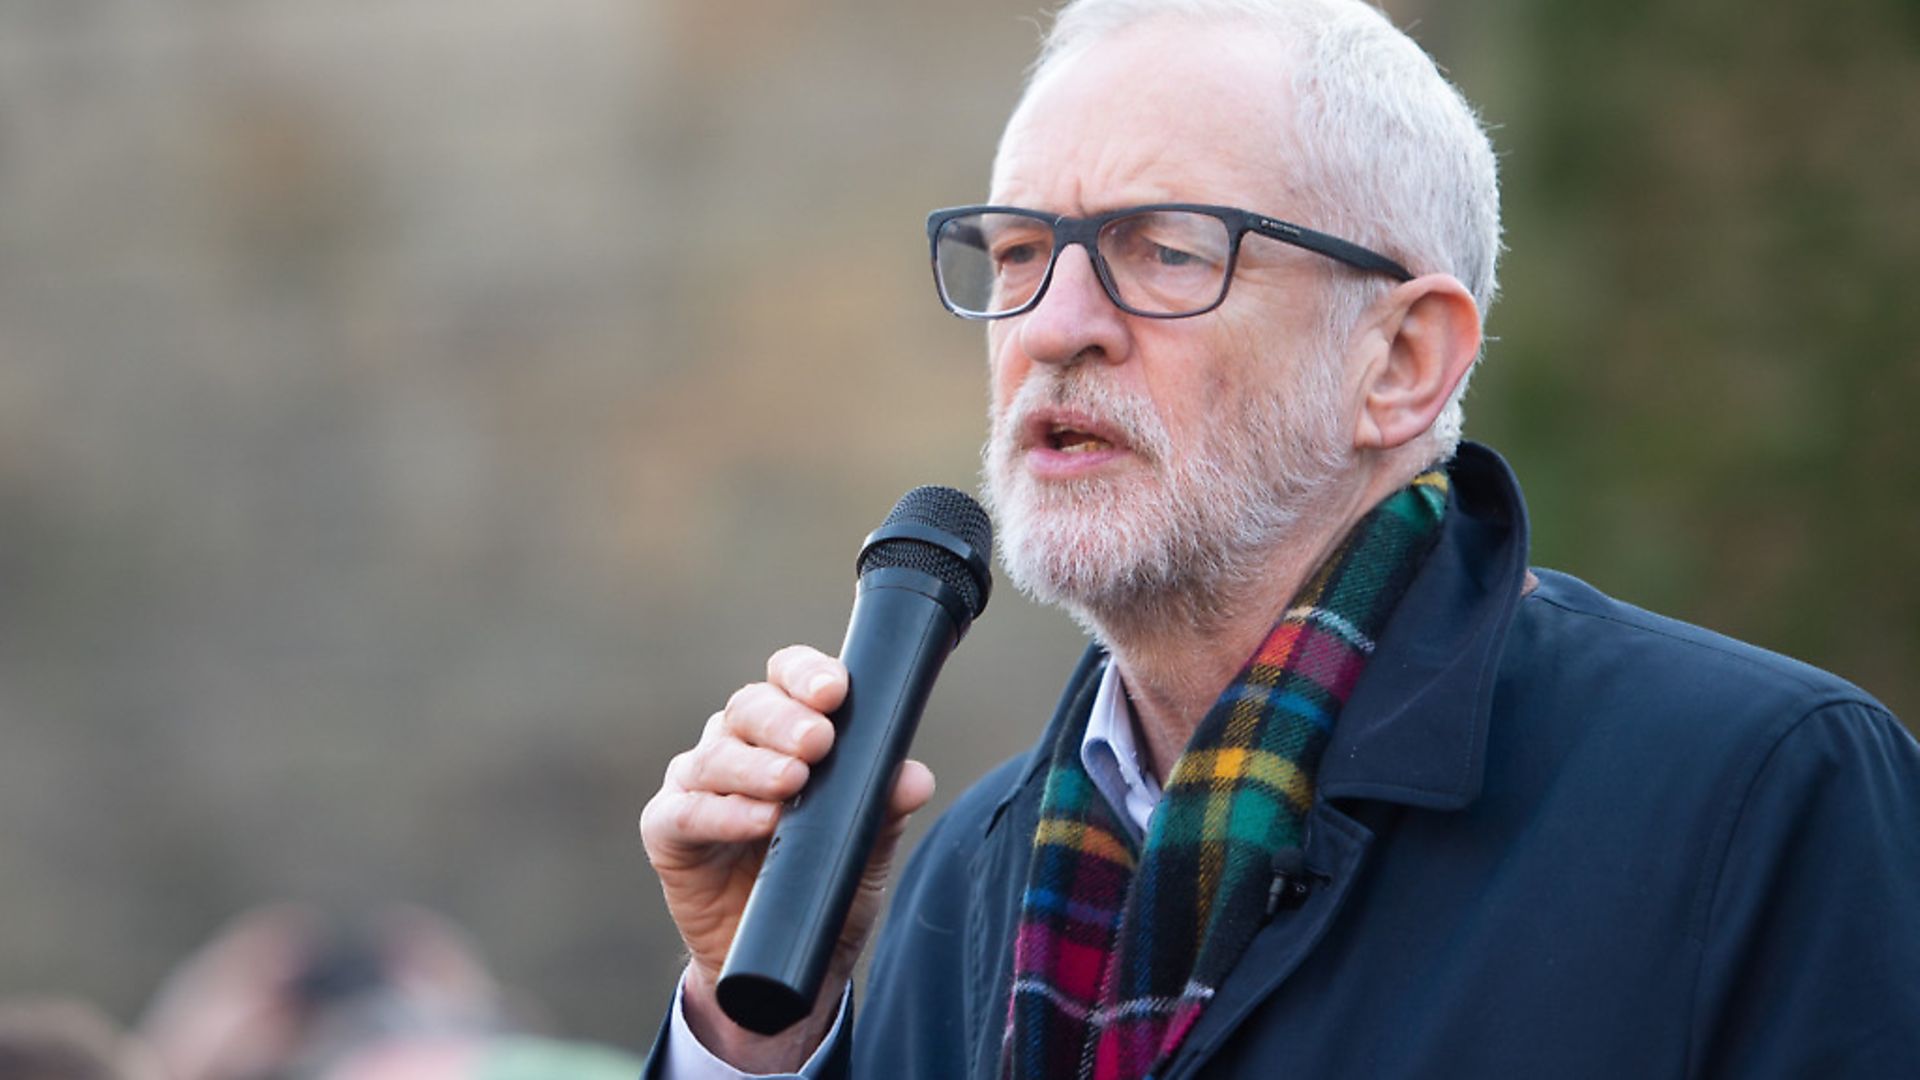 The New Statesman, which presents itself as a left-wing newspaper, has called Jeremy Corbyn 'unfit to be prime minister' and is refusing to endorse the Labour Party in the forthcoming election. Photo: Joe Giddens/PA Wire - Credit: PA